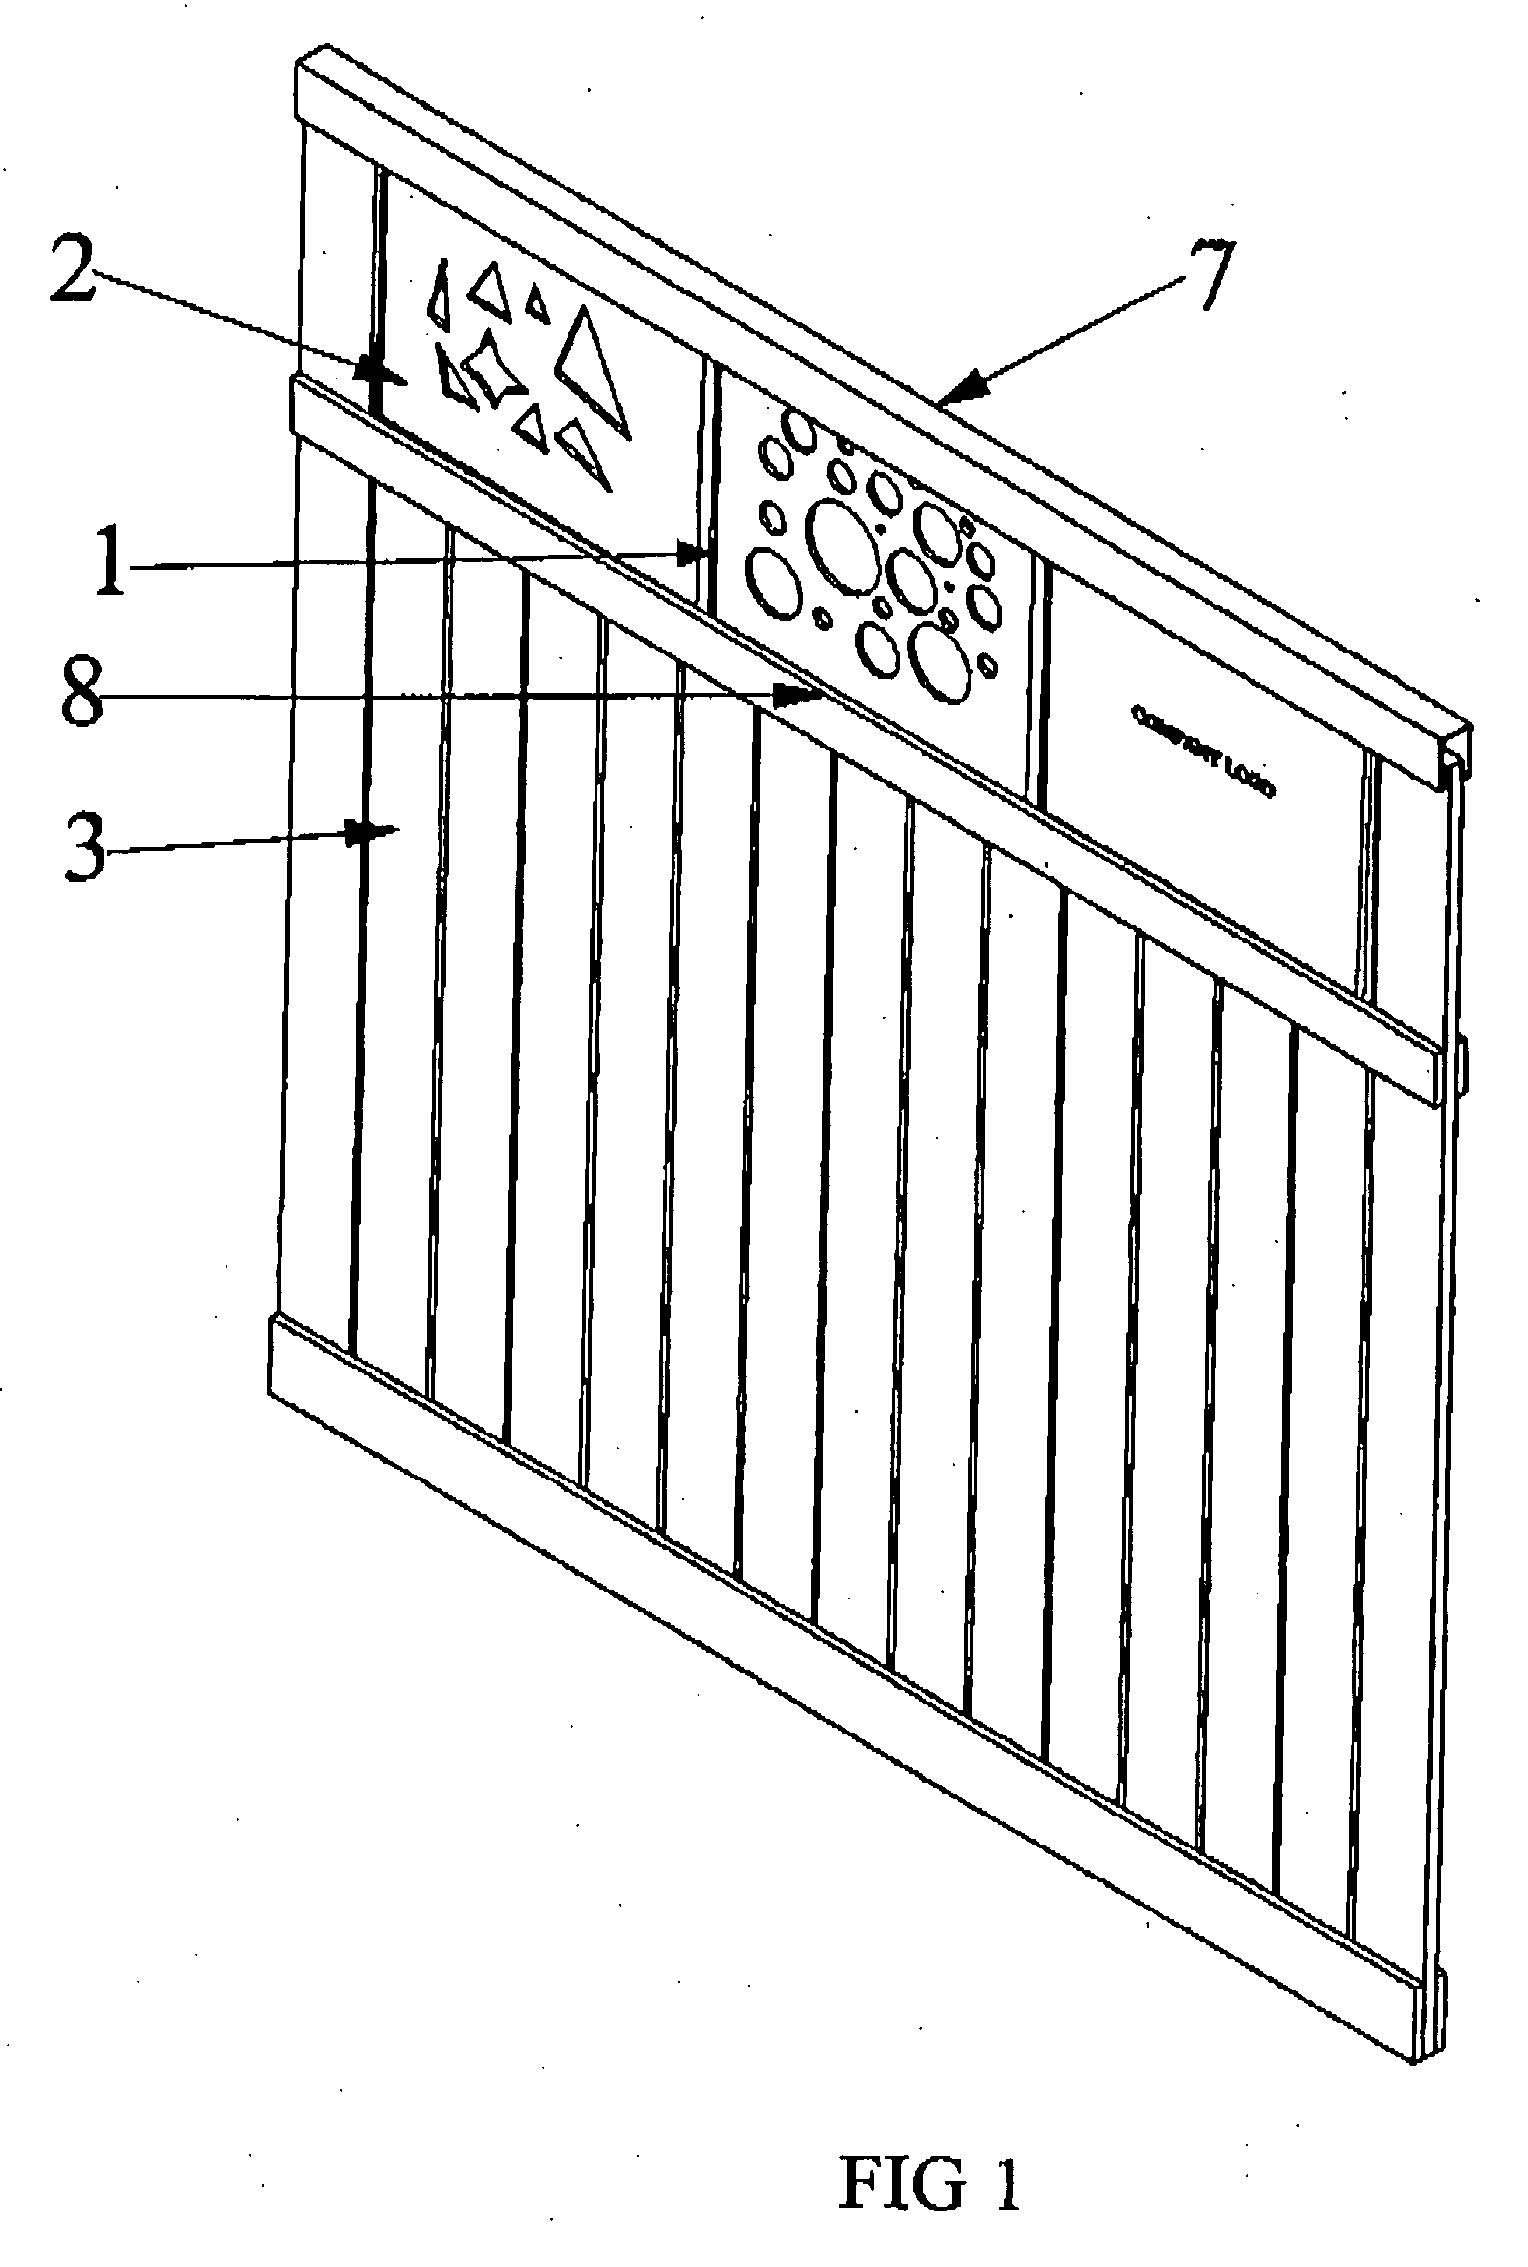 Novel modular molded frame with interchangeable design panels for vinyl fencing and its method of fabrication